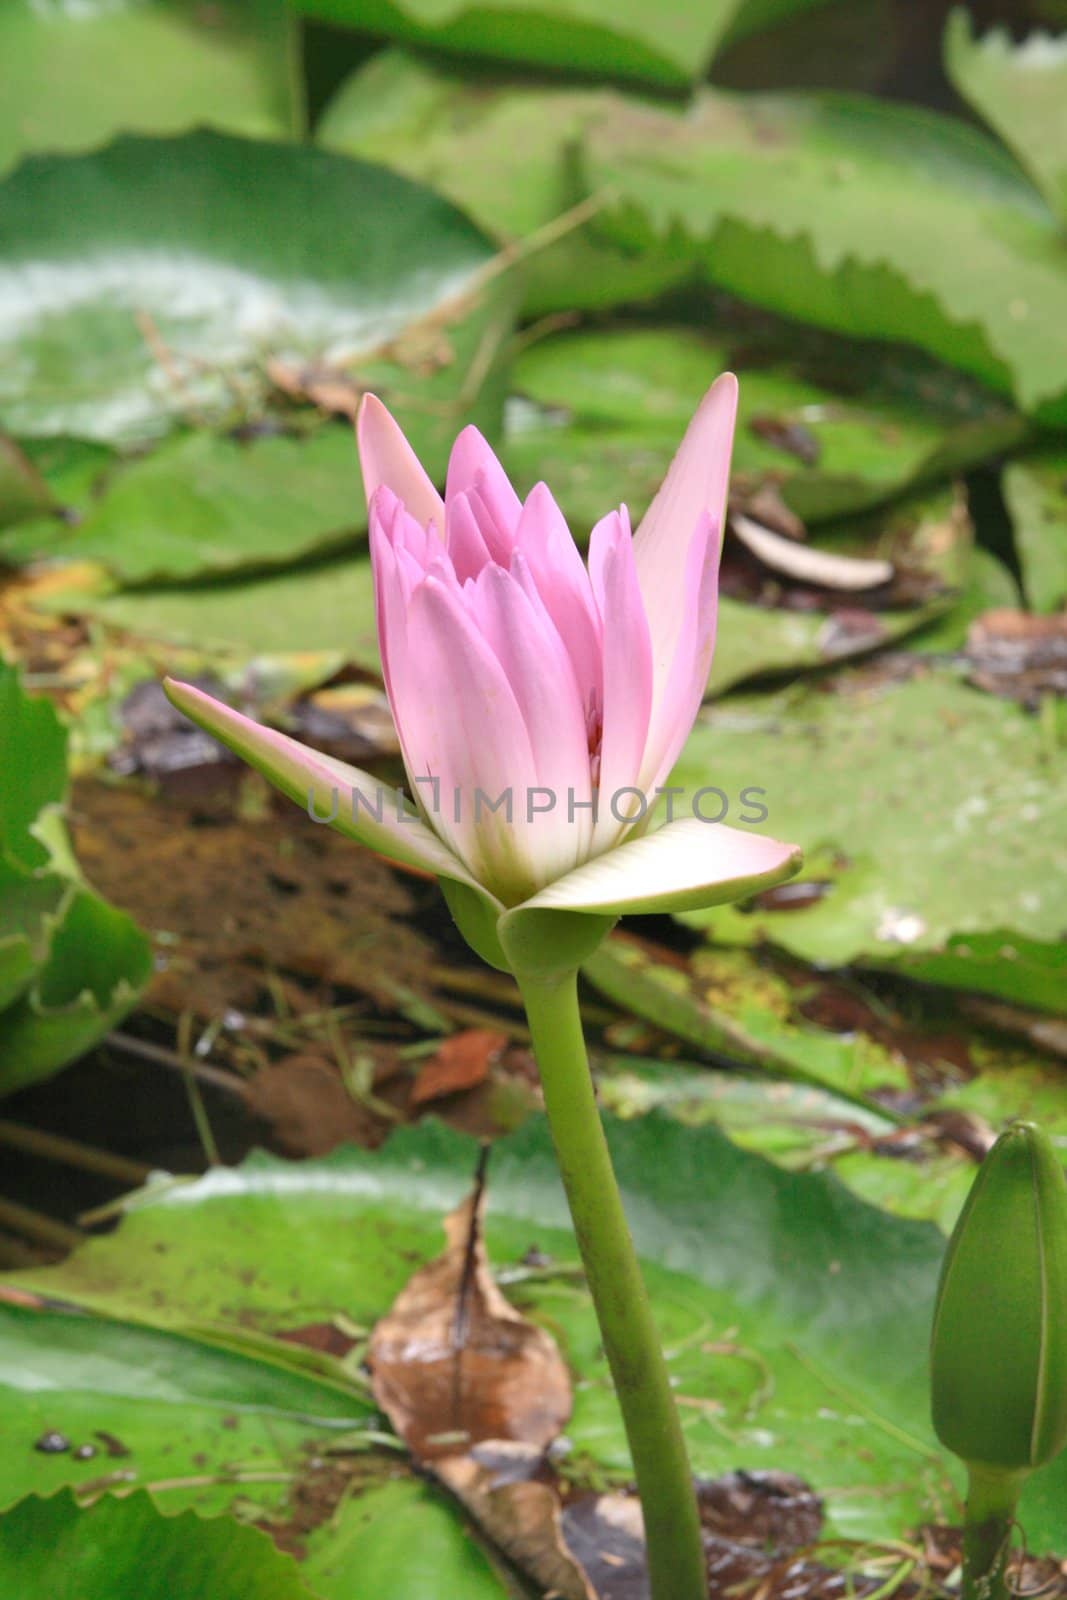 A partly opened pink flower of the water lily, an aquatic plant of the Nymphaea family